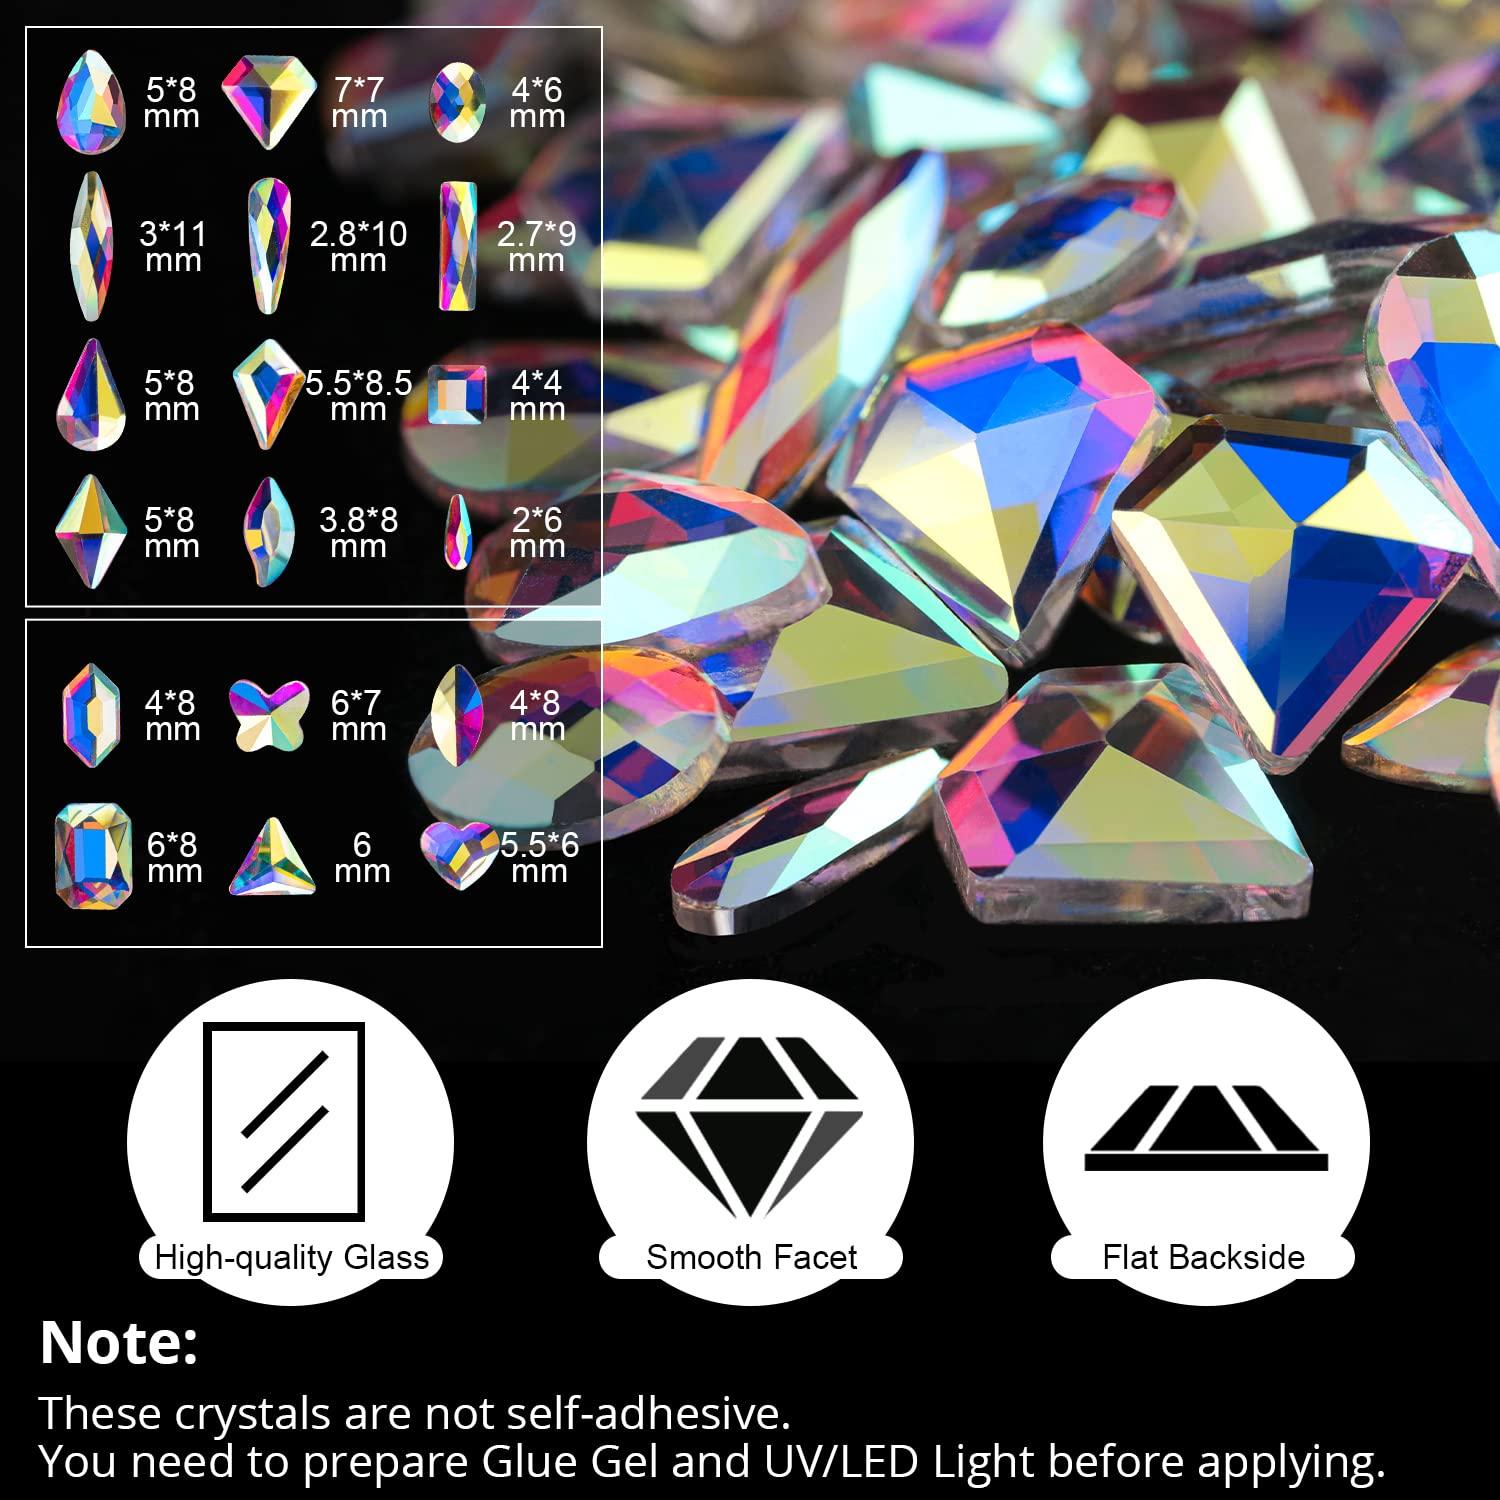 18 Styles Multi-shaped Glass Gemstones for Nails and 6 Sizes Round Crystal  Rhinestones Kit #1, Iridescent AB Nail Art Charm Bead Manicure Decoration  with Pickup Pencil and Tweezer 01-Iridescent AB